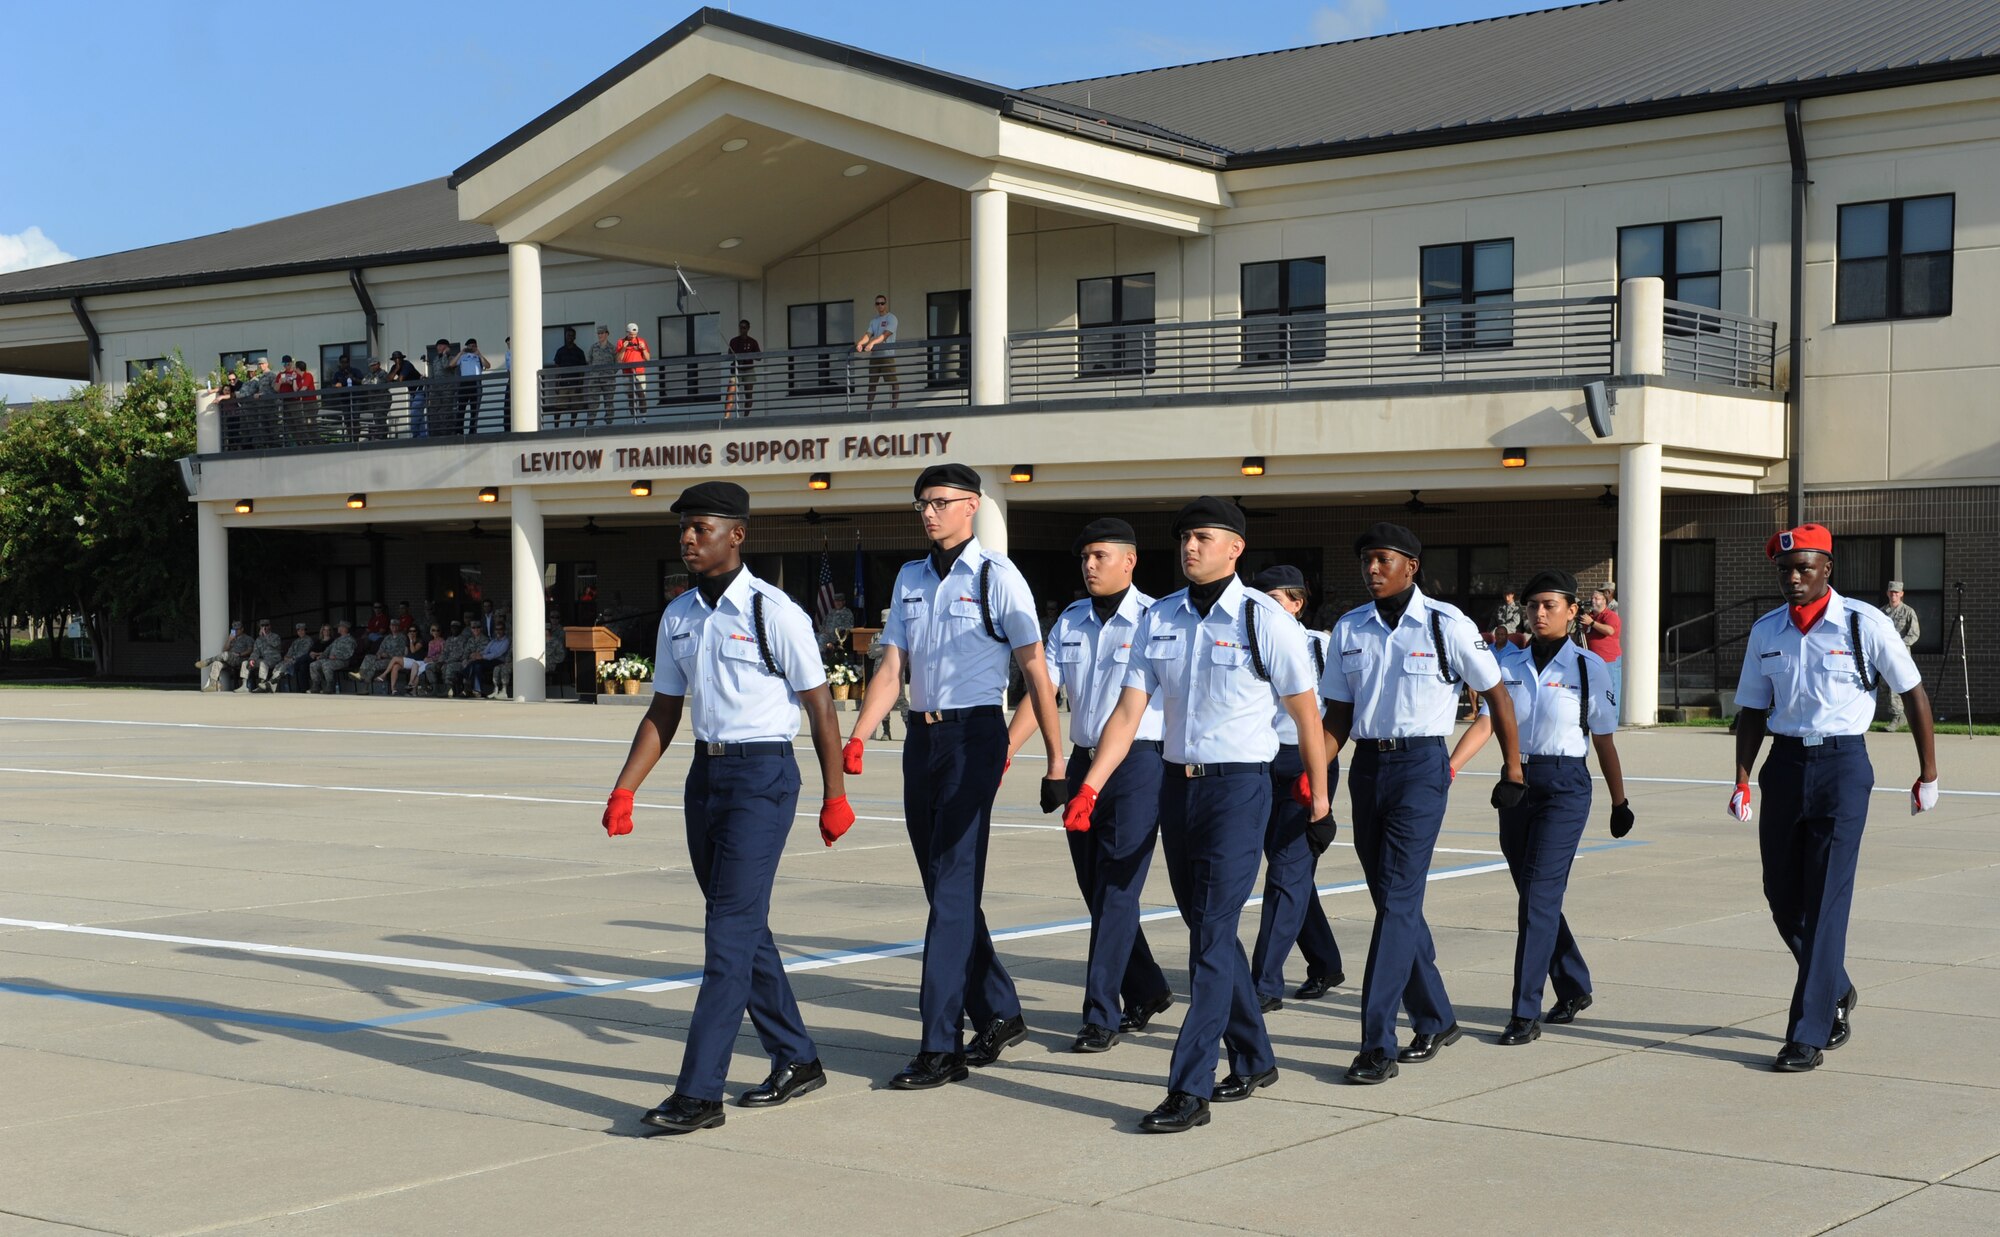 Members of the 336th Training Squadron regulation drill team perform during the 81st Training Group drill down at the Levitow Training Support Facility drill pad Sept. 9, 2016, on Keesler Air Force Base, Miss. The 336th TRS “Red Wolves” placed first in freestyle and third in regulation and overall. (U.S. Air Force photo by Kemberly Groue/Released)